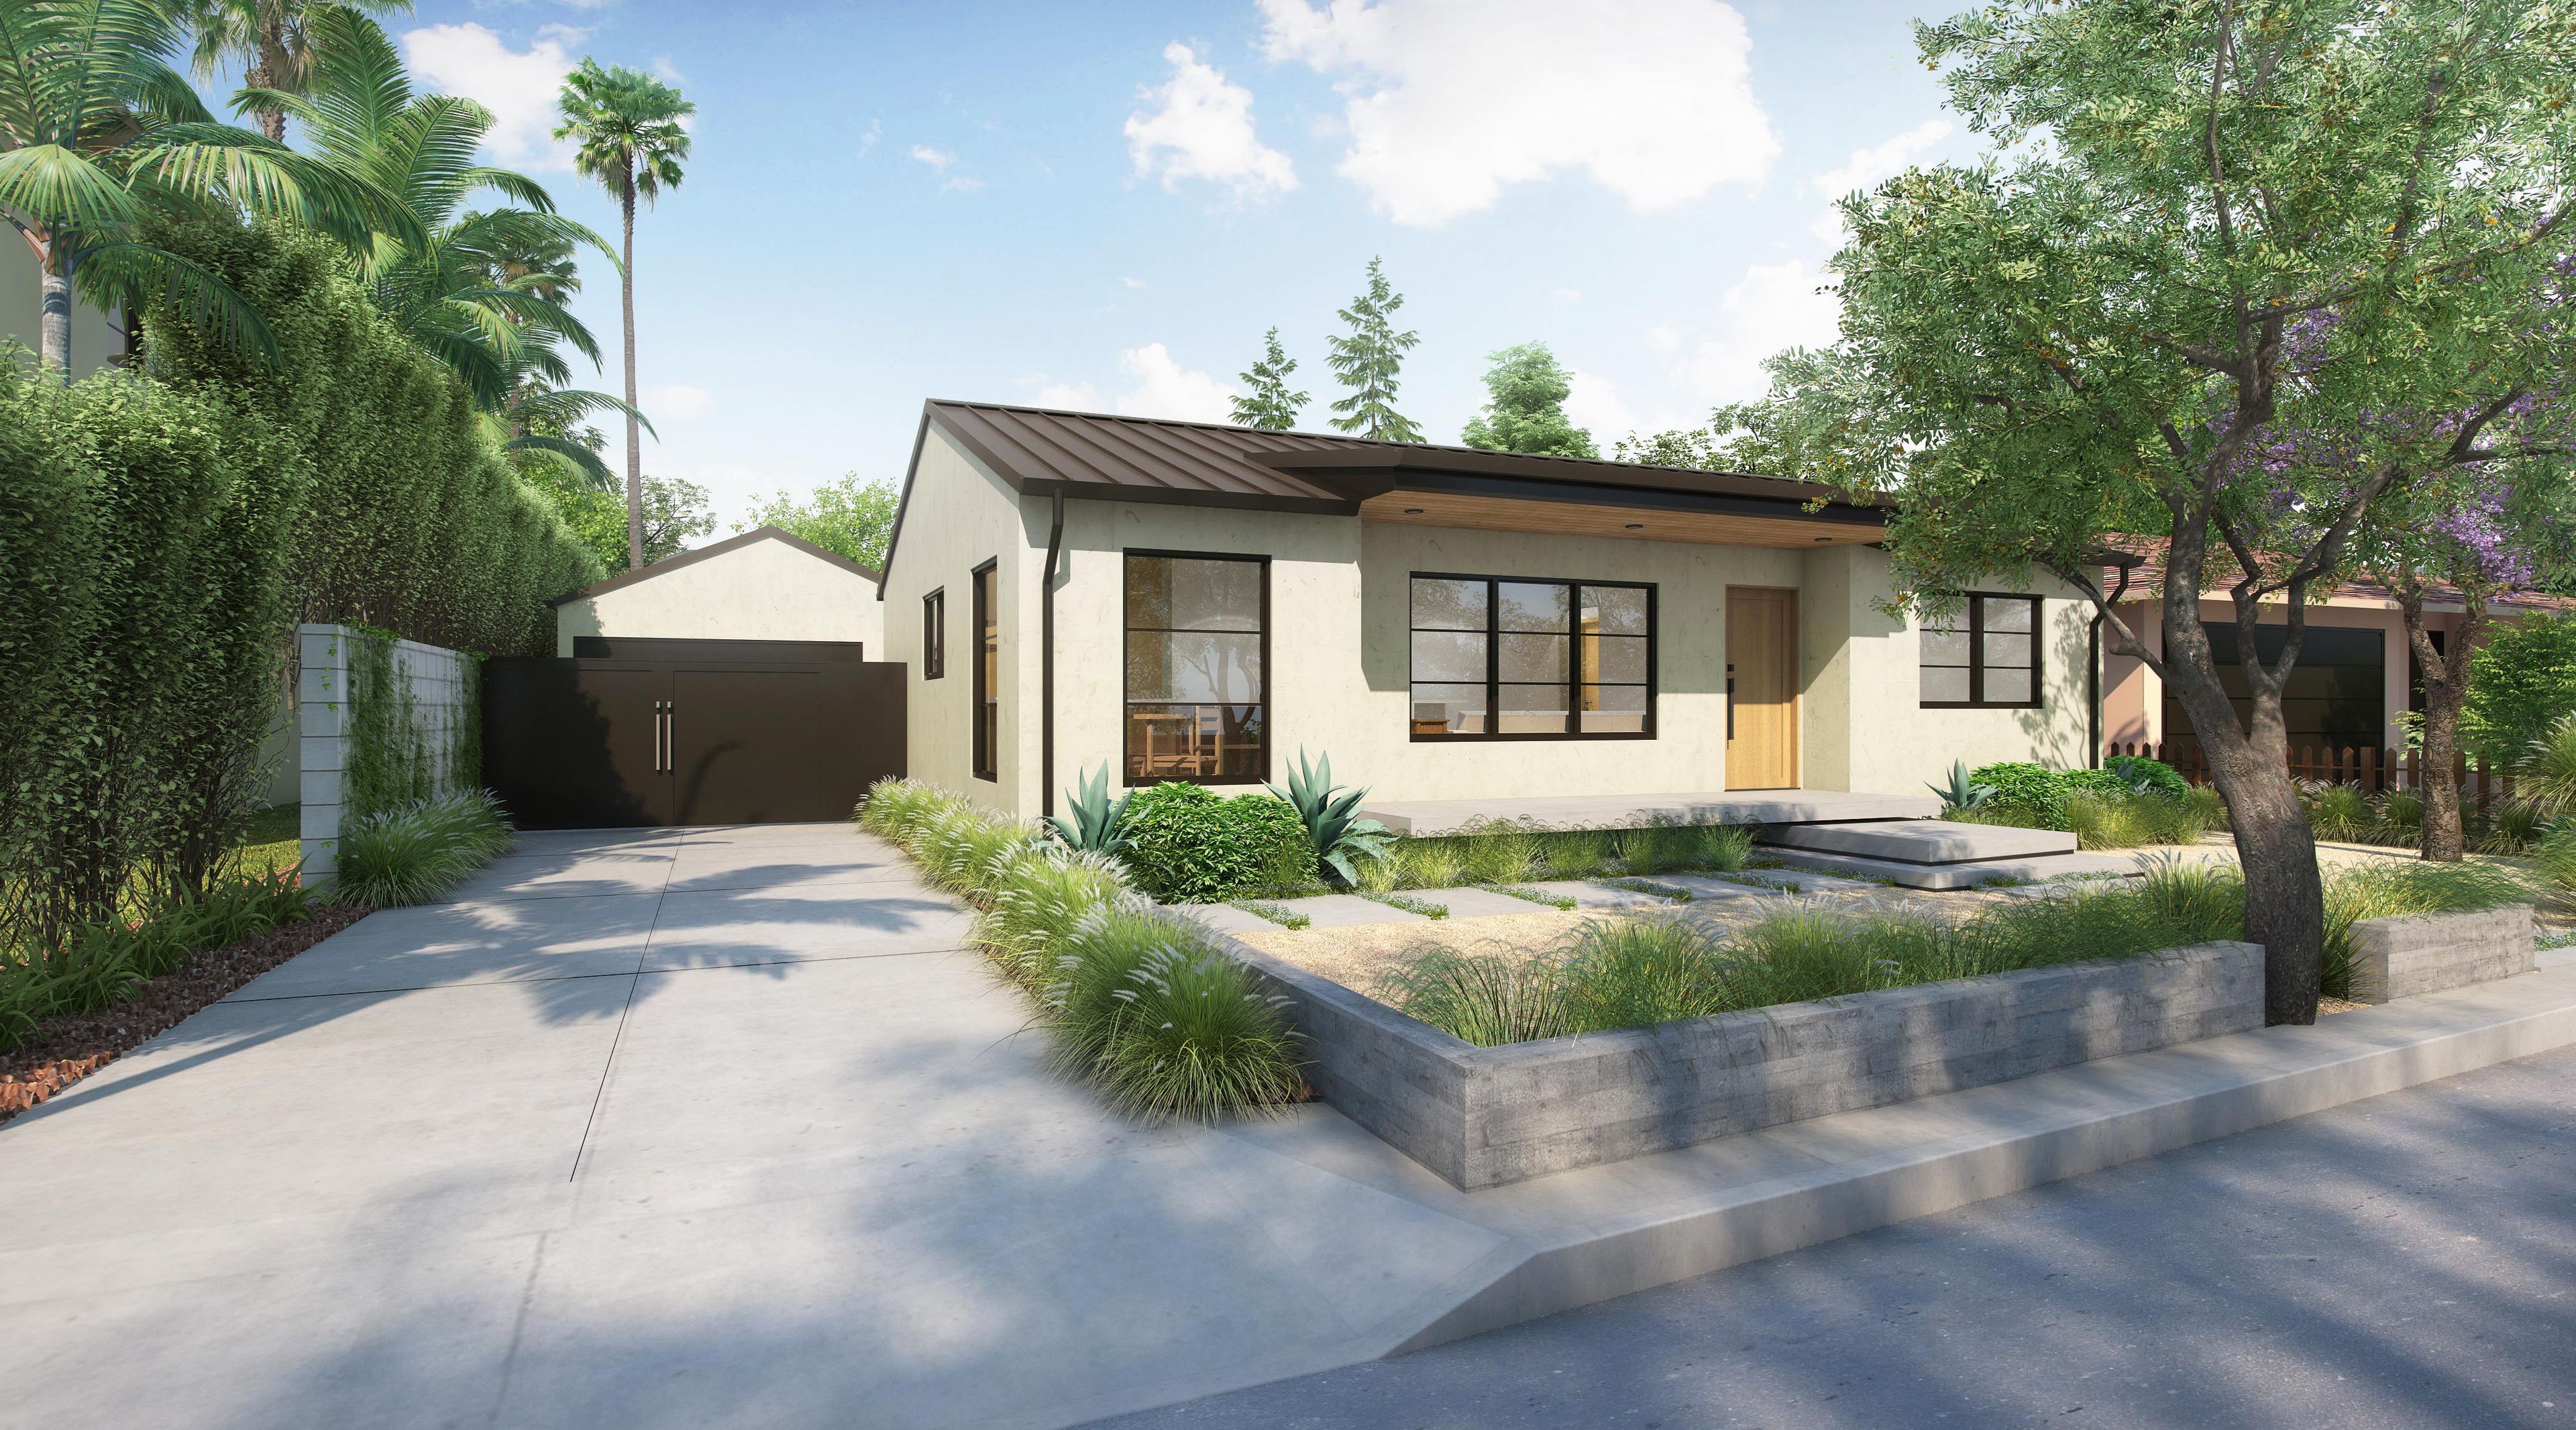 A newly refreshed California bungalow